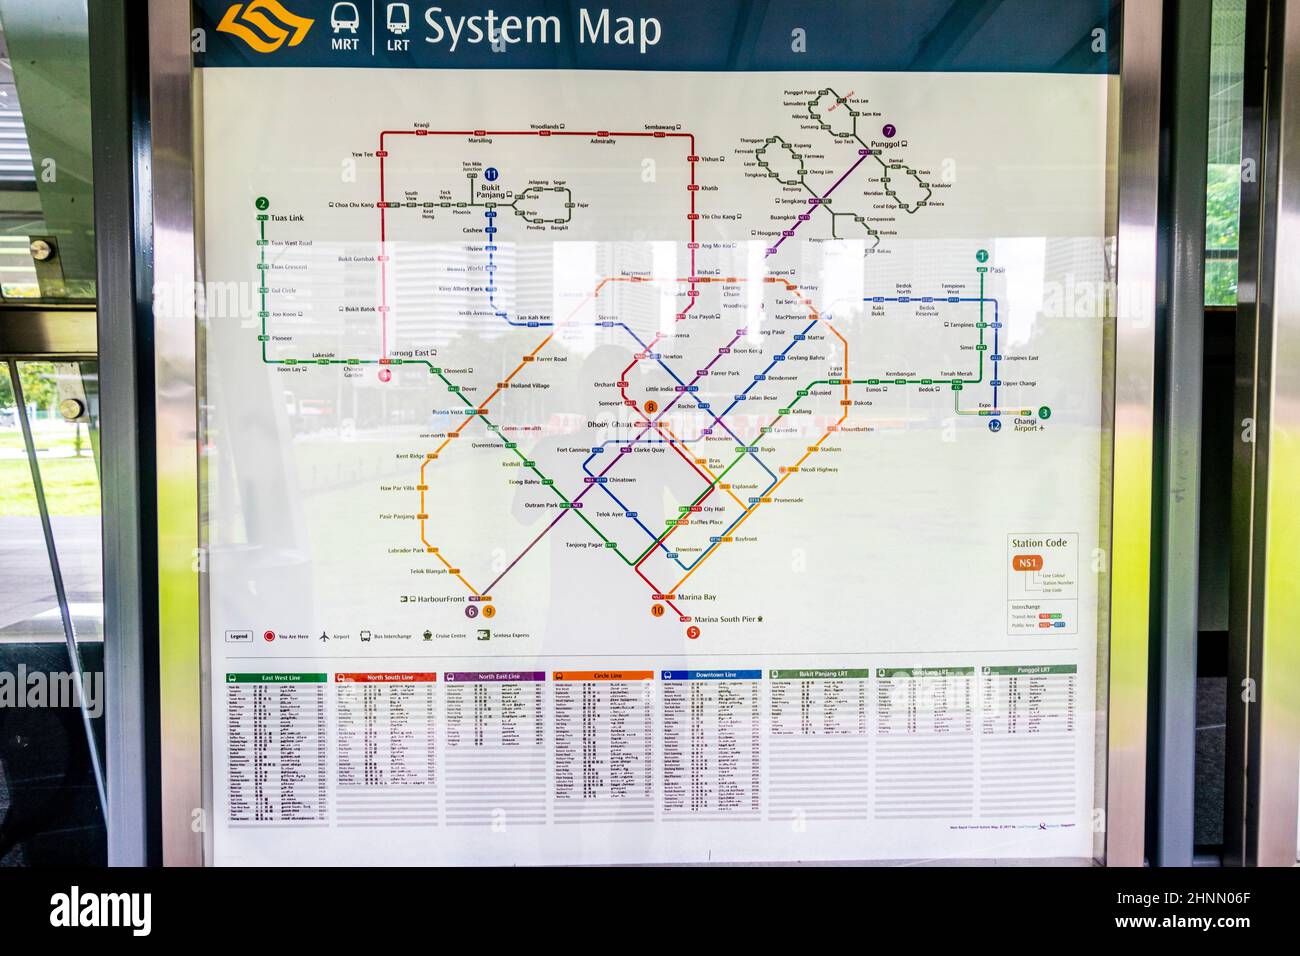 MRT and LRT System Map Metro subway stops in Singapore. Stock Photo